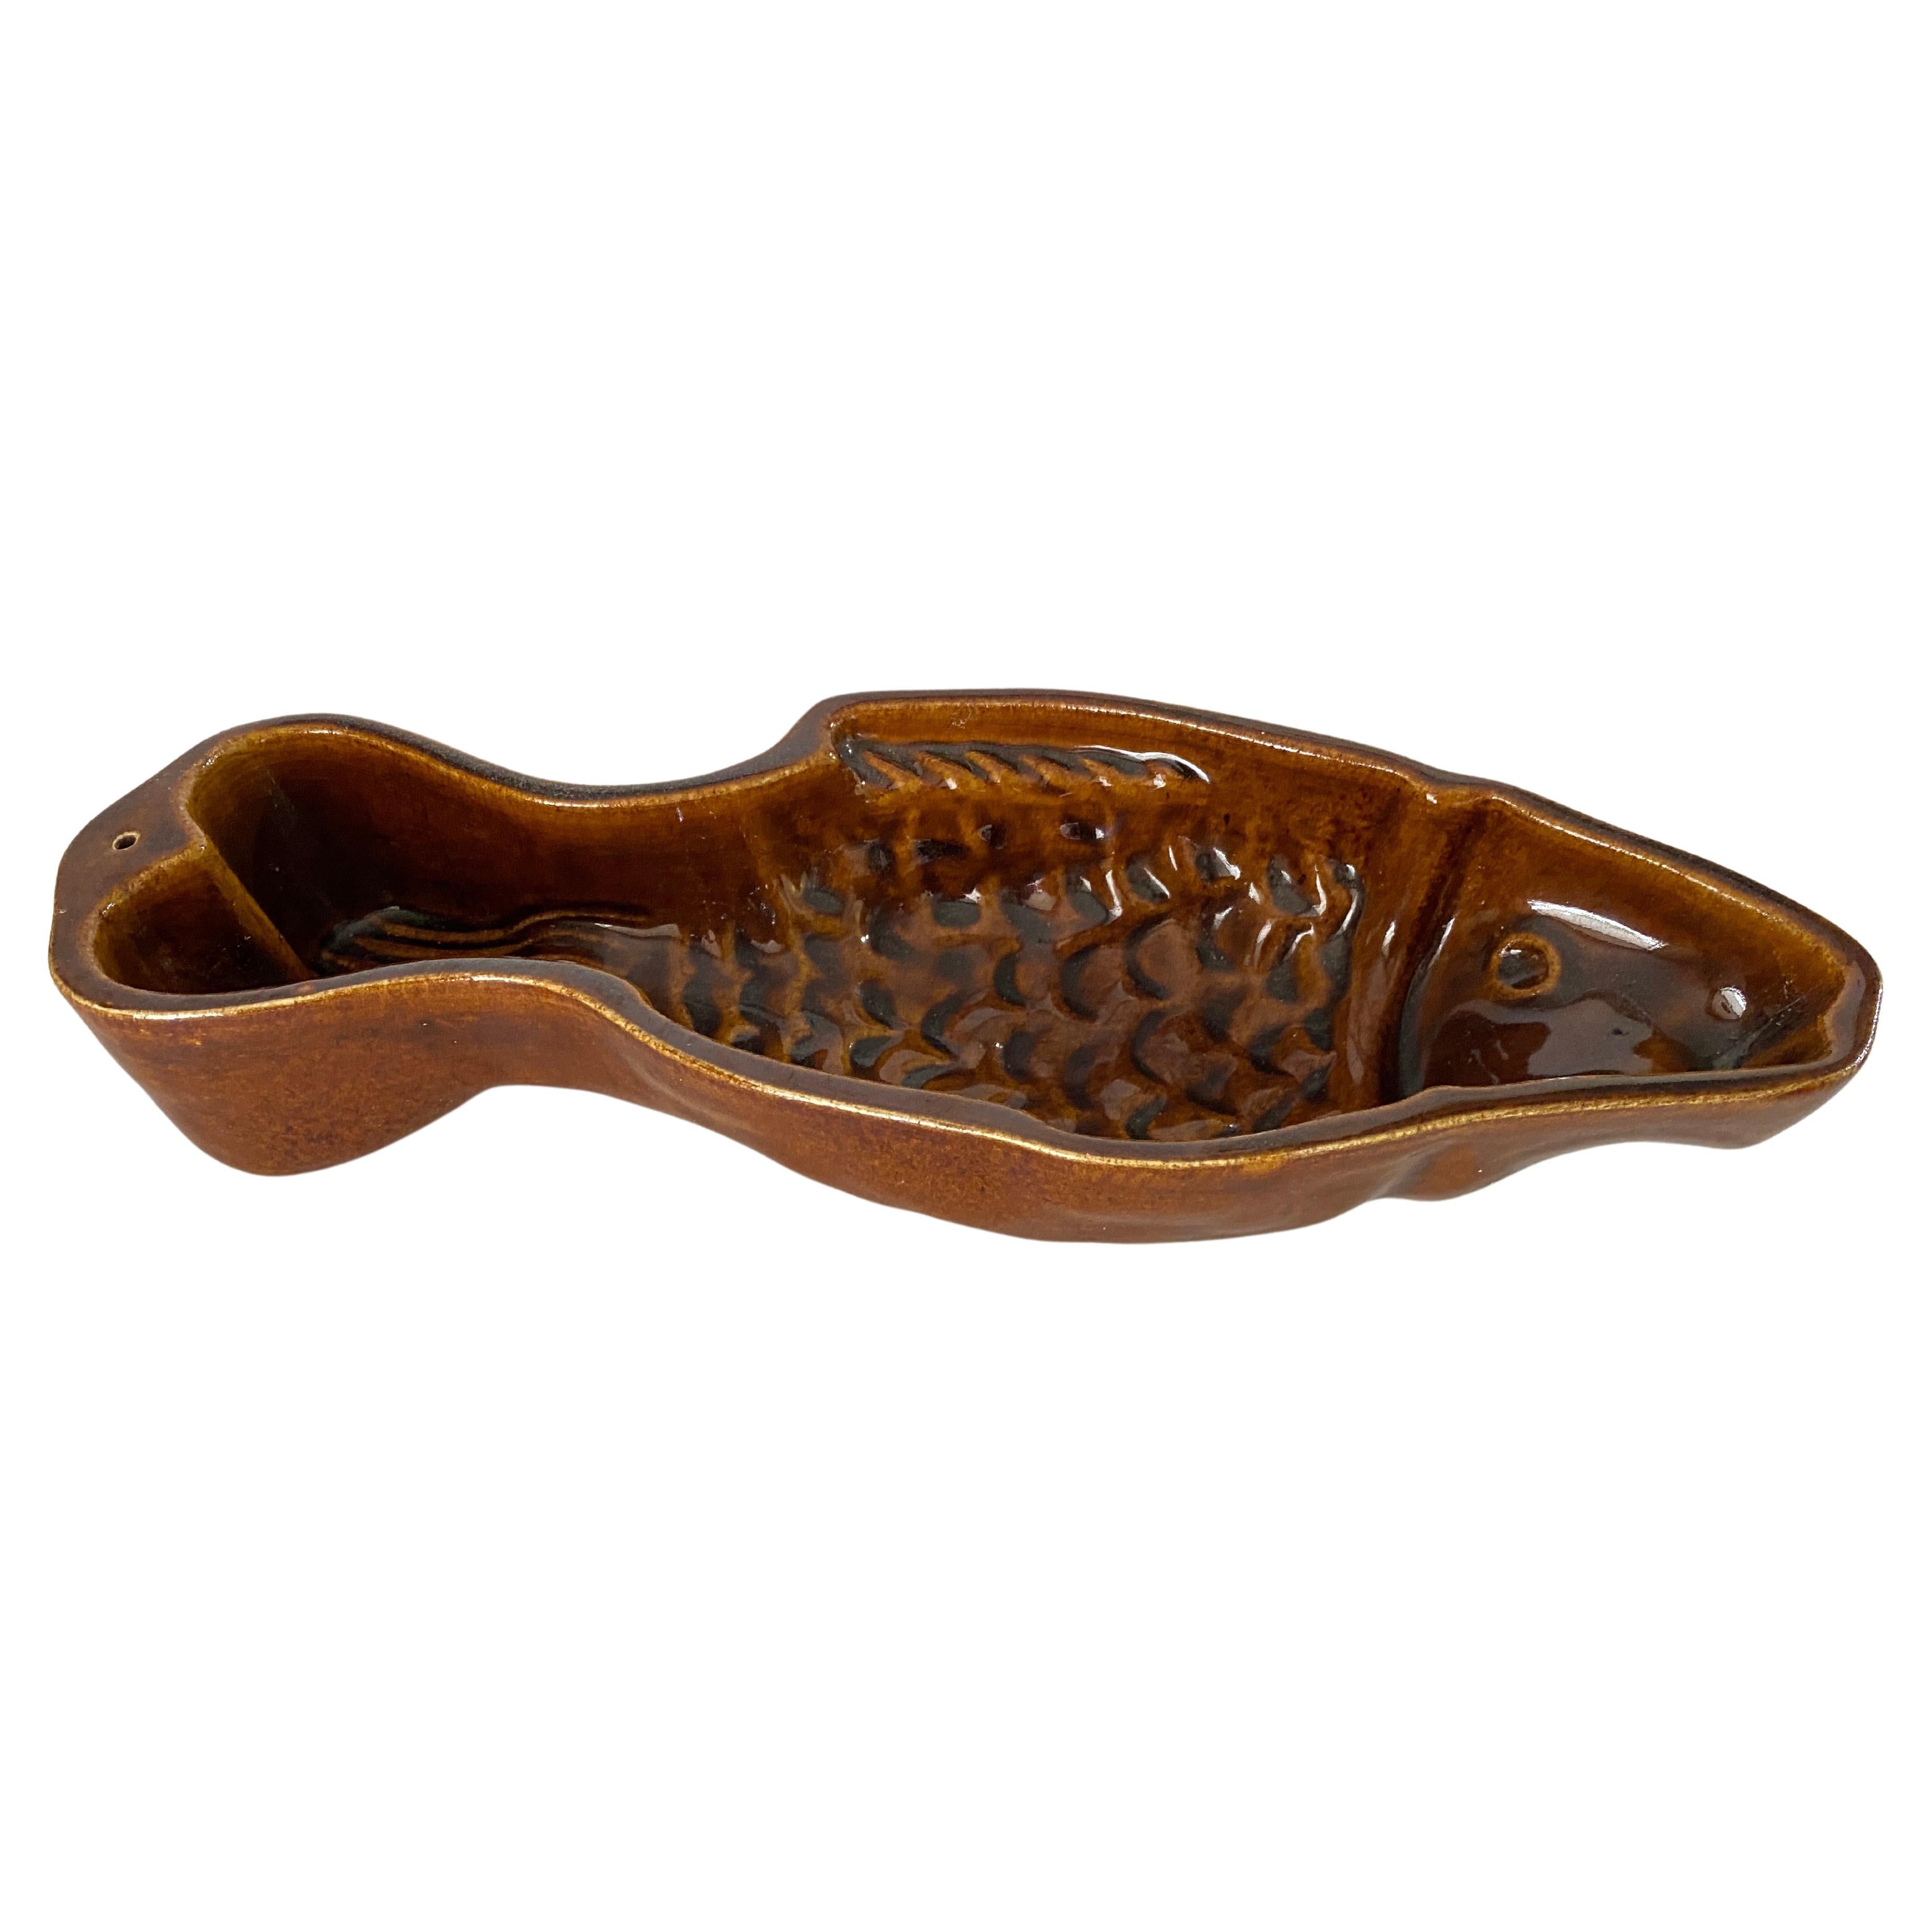 This Ceramic Ashtray or Vide Poche, has a Fish Shape. The colors are the Brown.
It has been made in Italy Circa 1960
